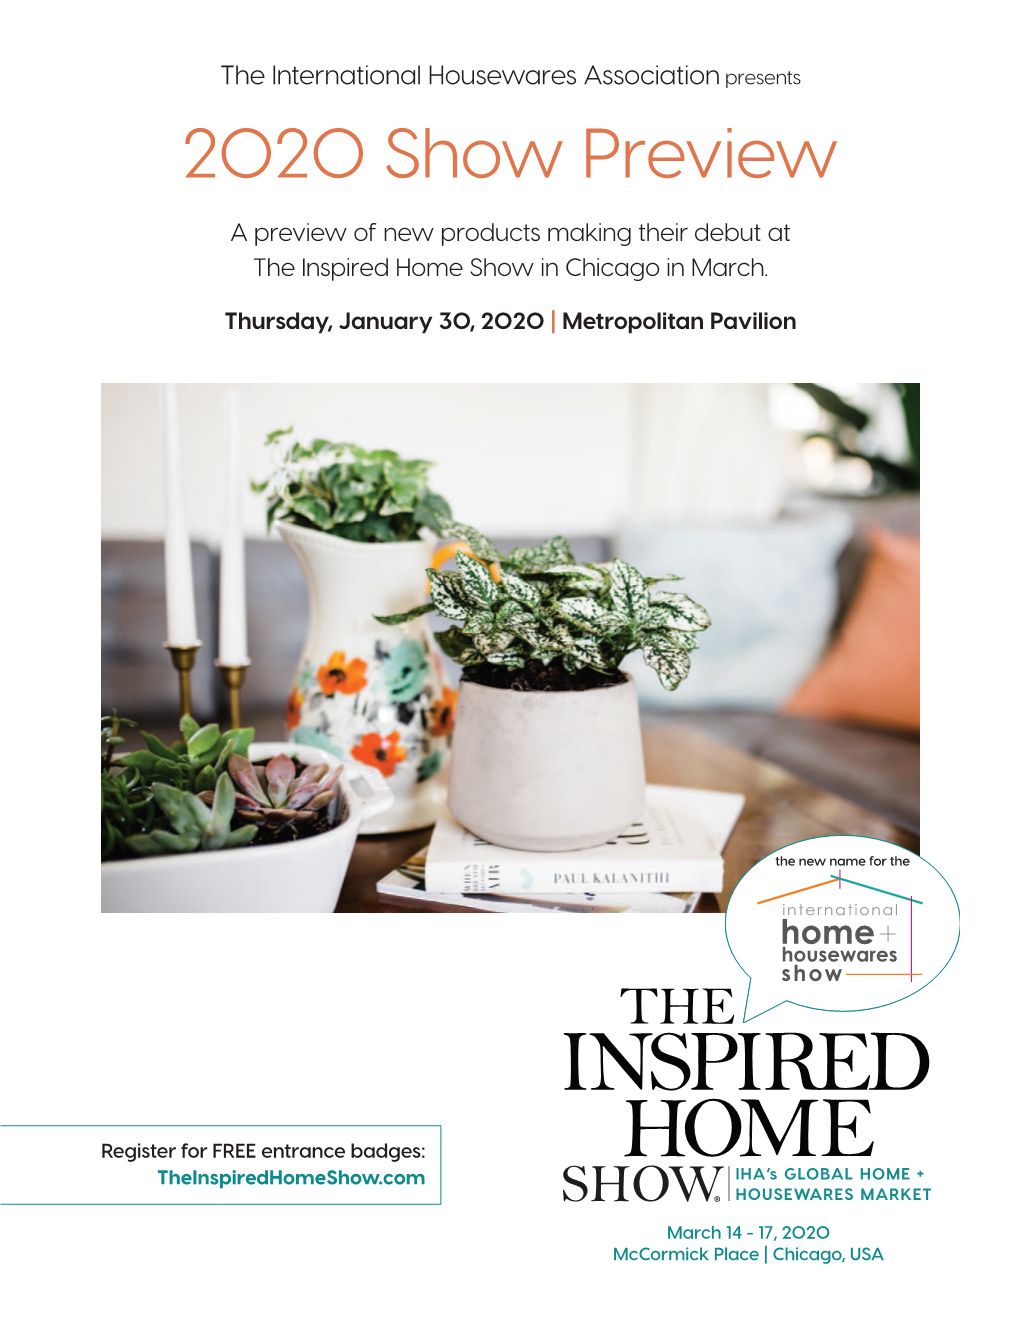 The Inspired Home Show 2020 Show Preview Product Catalog